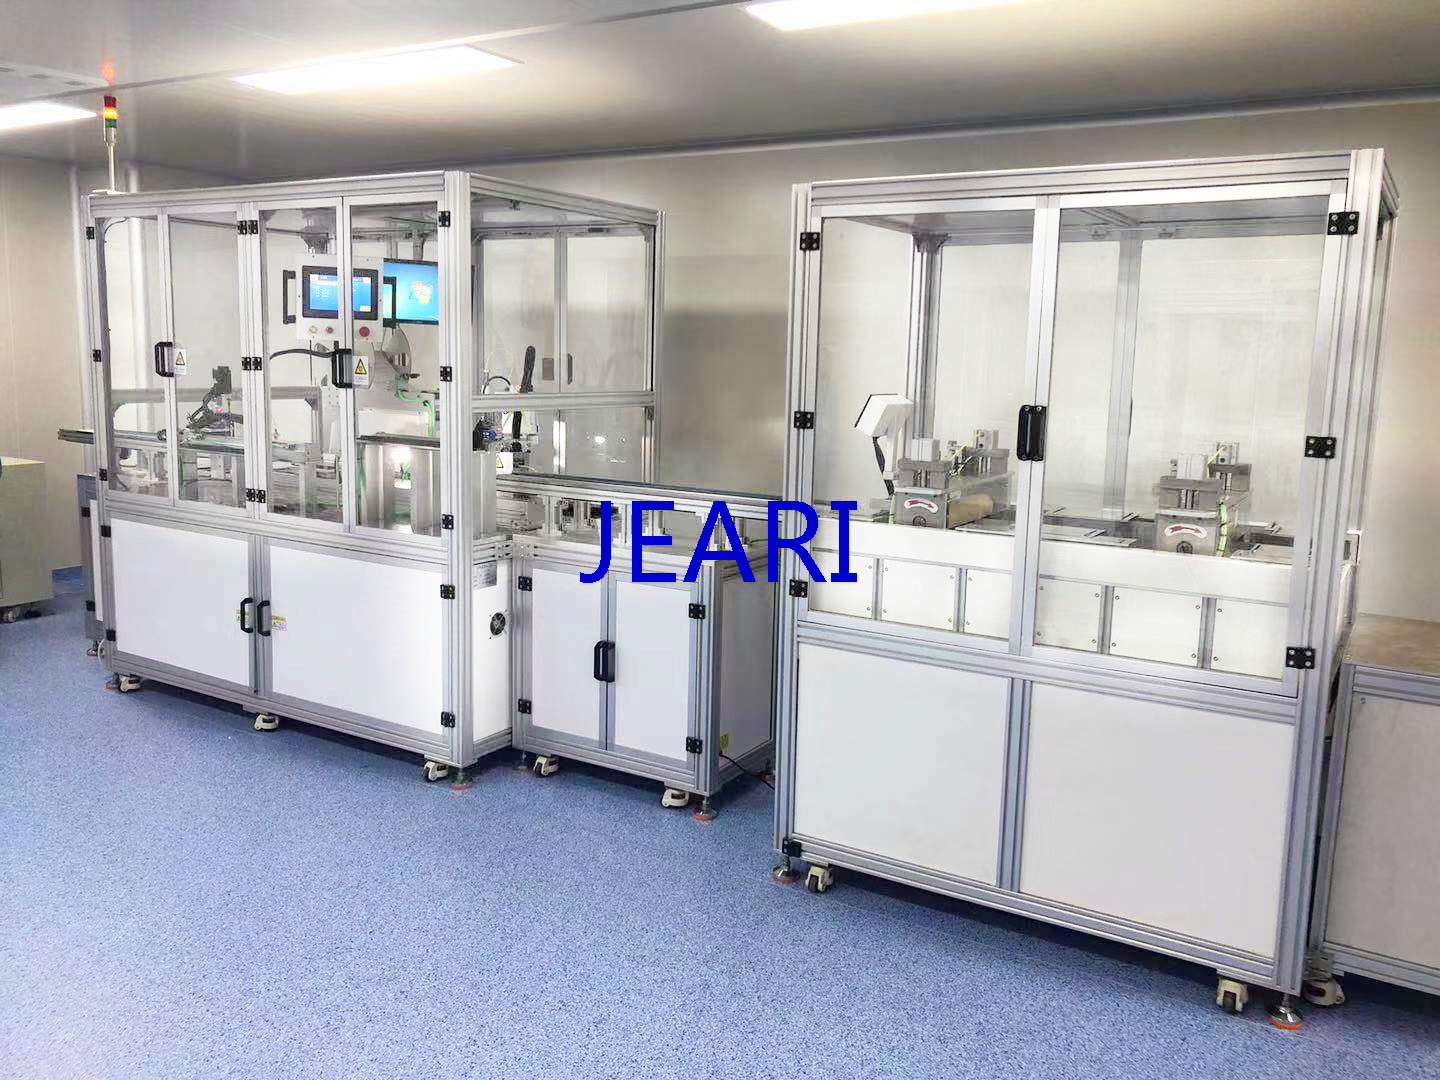 Blood glucose test strips production equipment